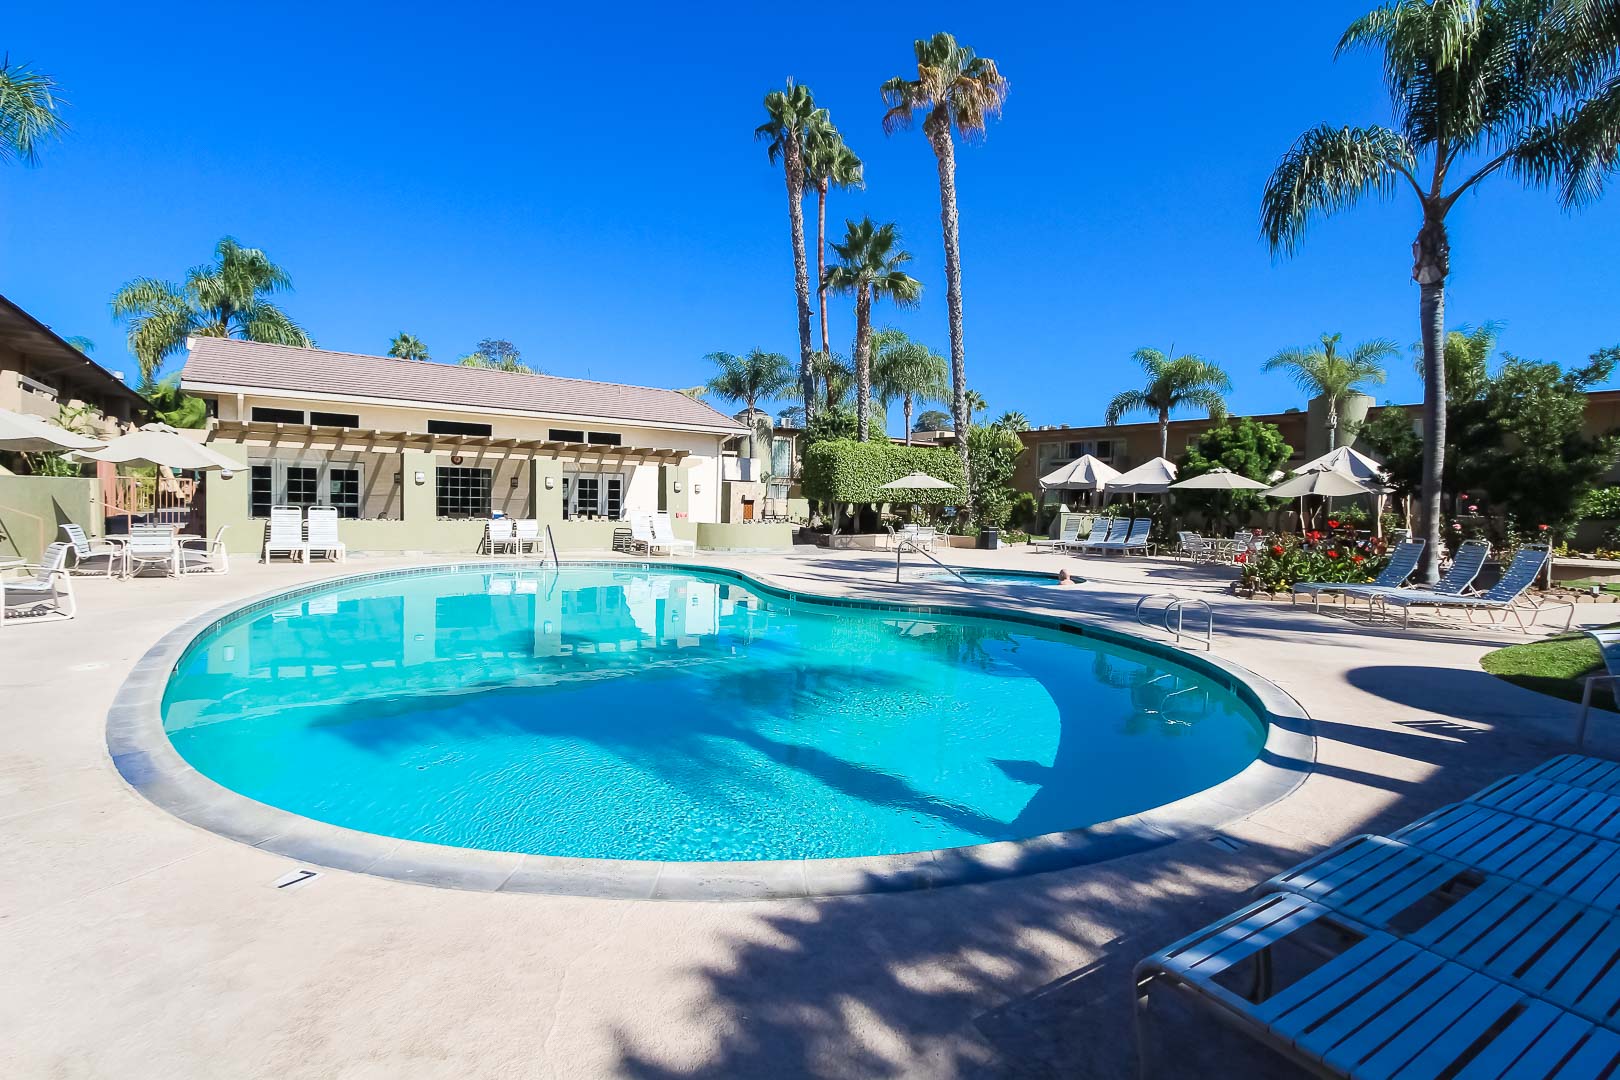 Clear skies and a clean outdoor swimming pool at VRI's Winner Circle Resort in California.